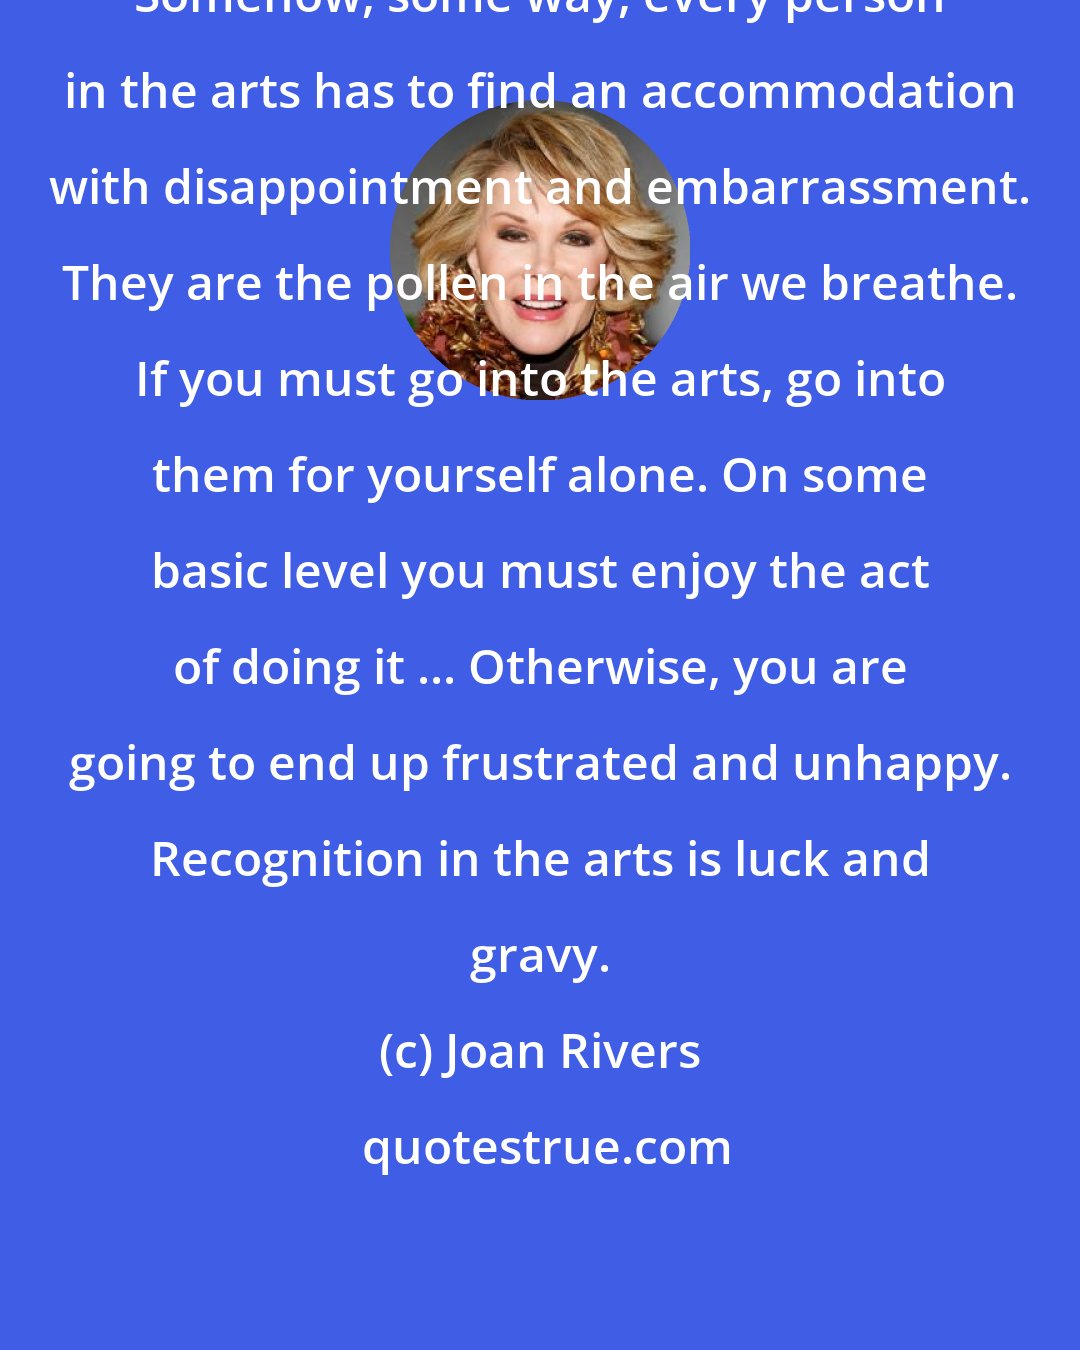 Joan Rivers: Somehow, some way, every person in the arts has to find an accommodation with disappointment and embarrassment. They are the pollen in the air we breathe. If you must go into the arts, go into them for yourself alone. On some basic level you must enjoy the act of doing it ... Otherwise, you are going to end up frustrated and unhappy. Recognition in the arts is luck and gravy.